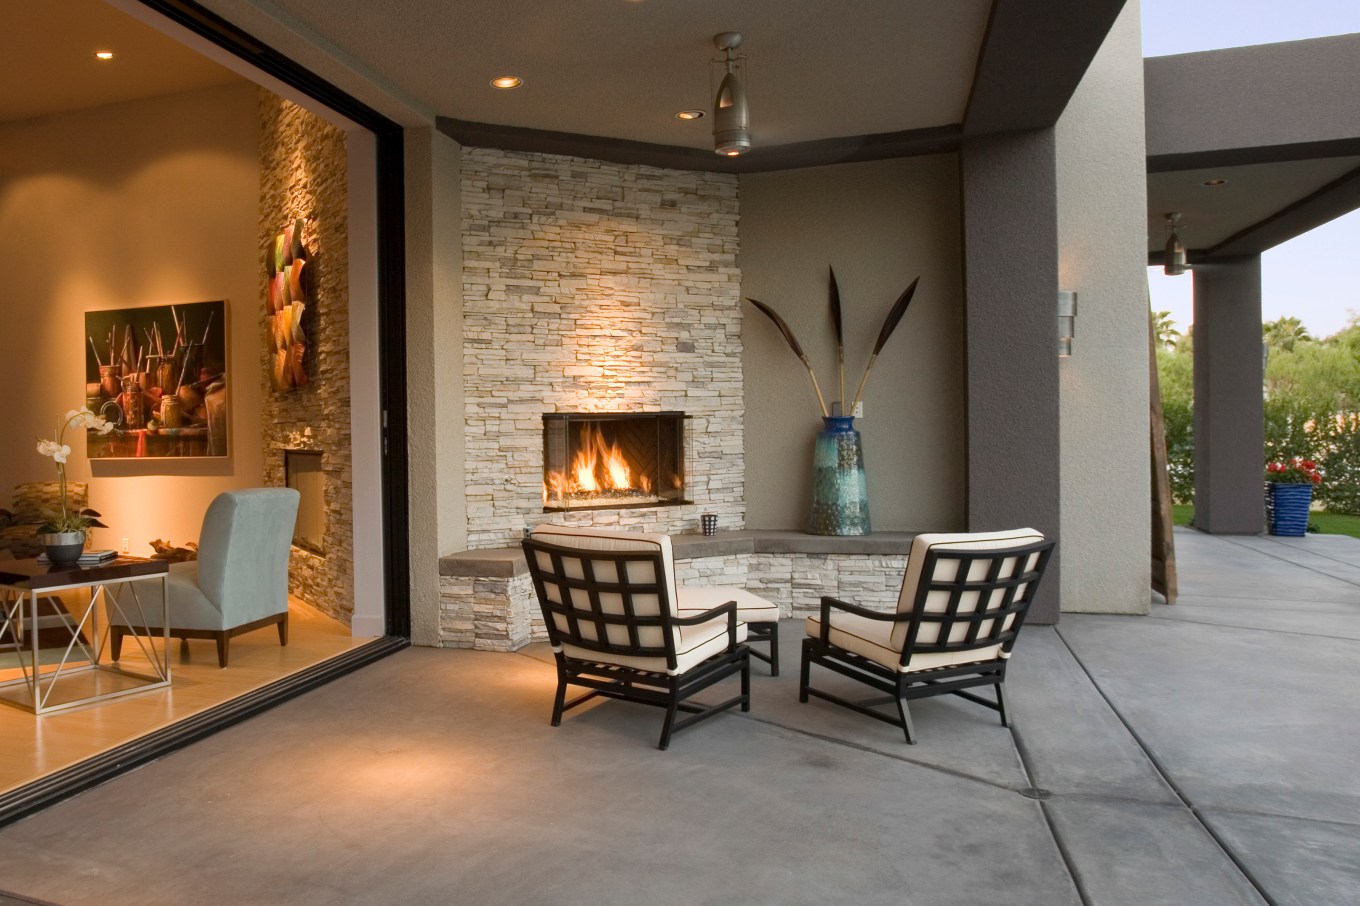 A modern, luxury outdoor fireplace on the patio with two chairs.